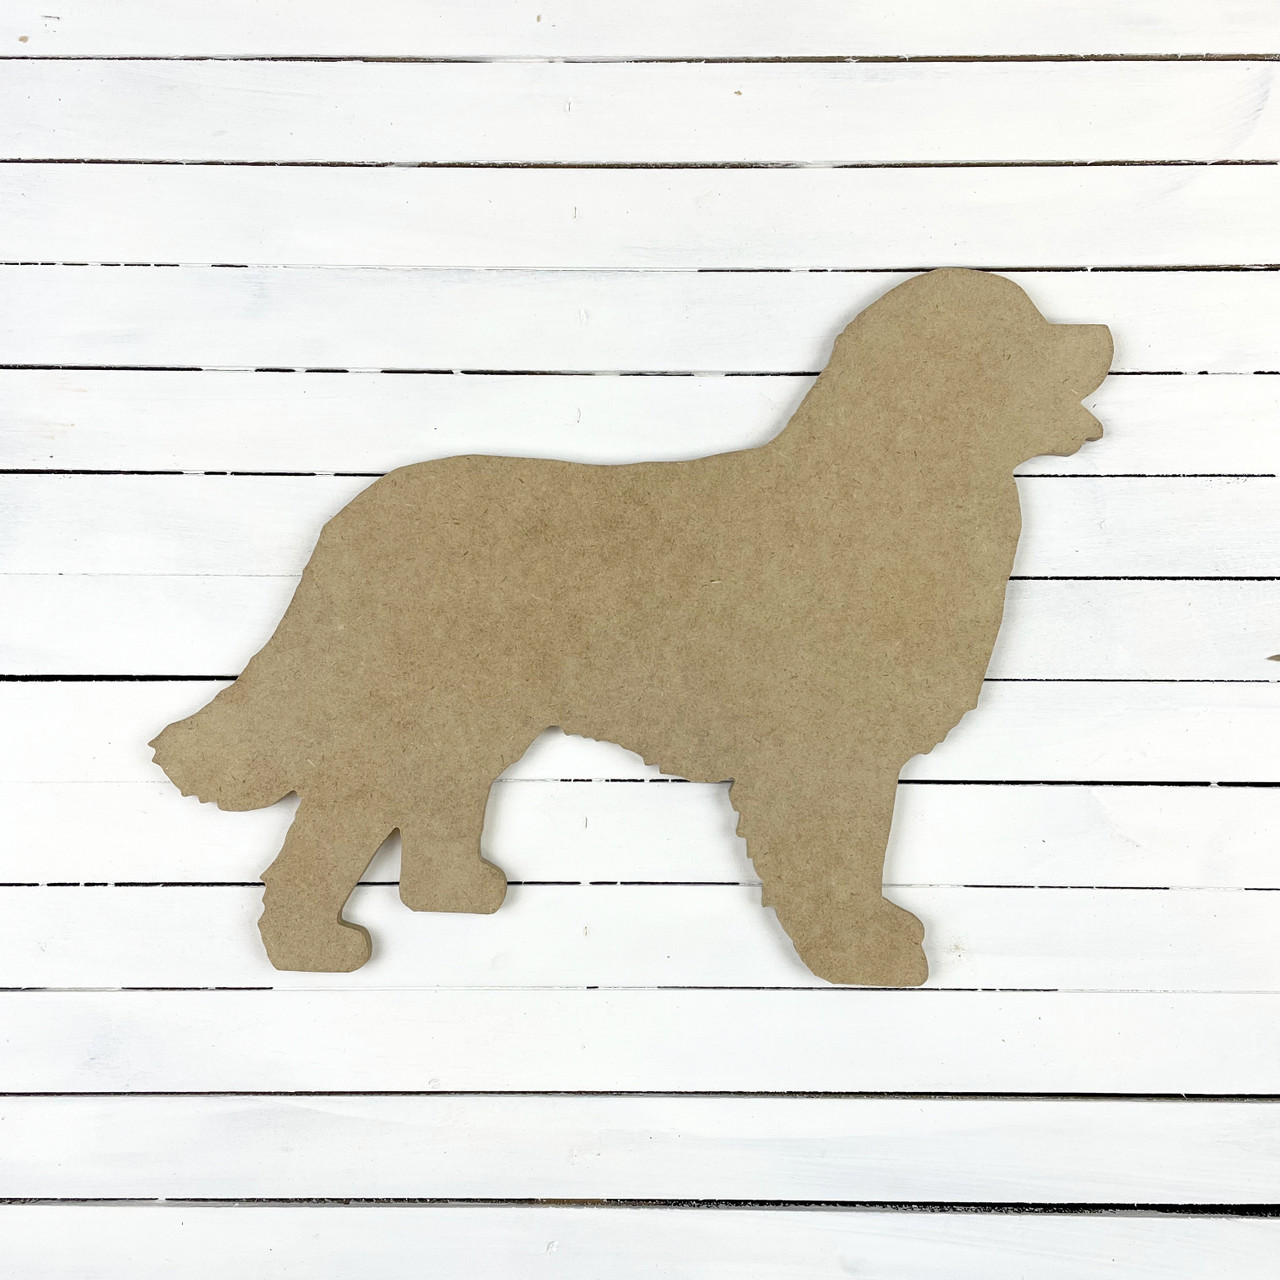 24 Wooden Dog Shape, Unfinished Wood Craft, Build-A-Cross 